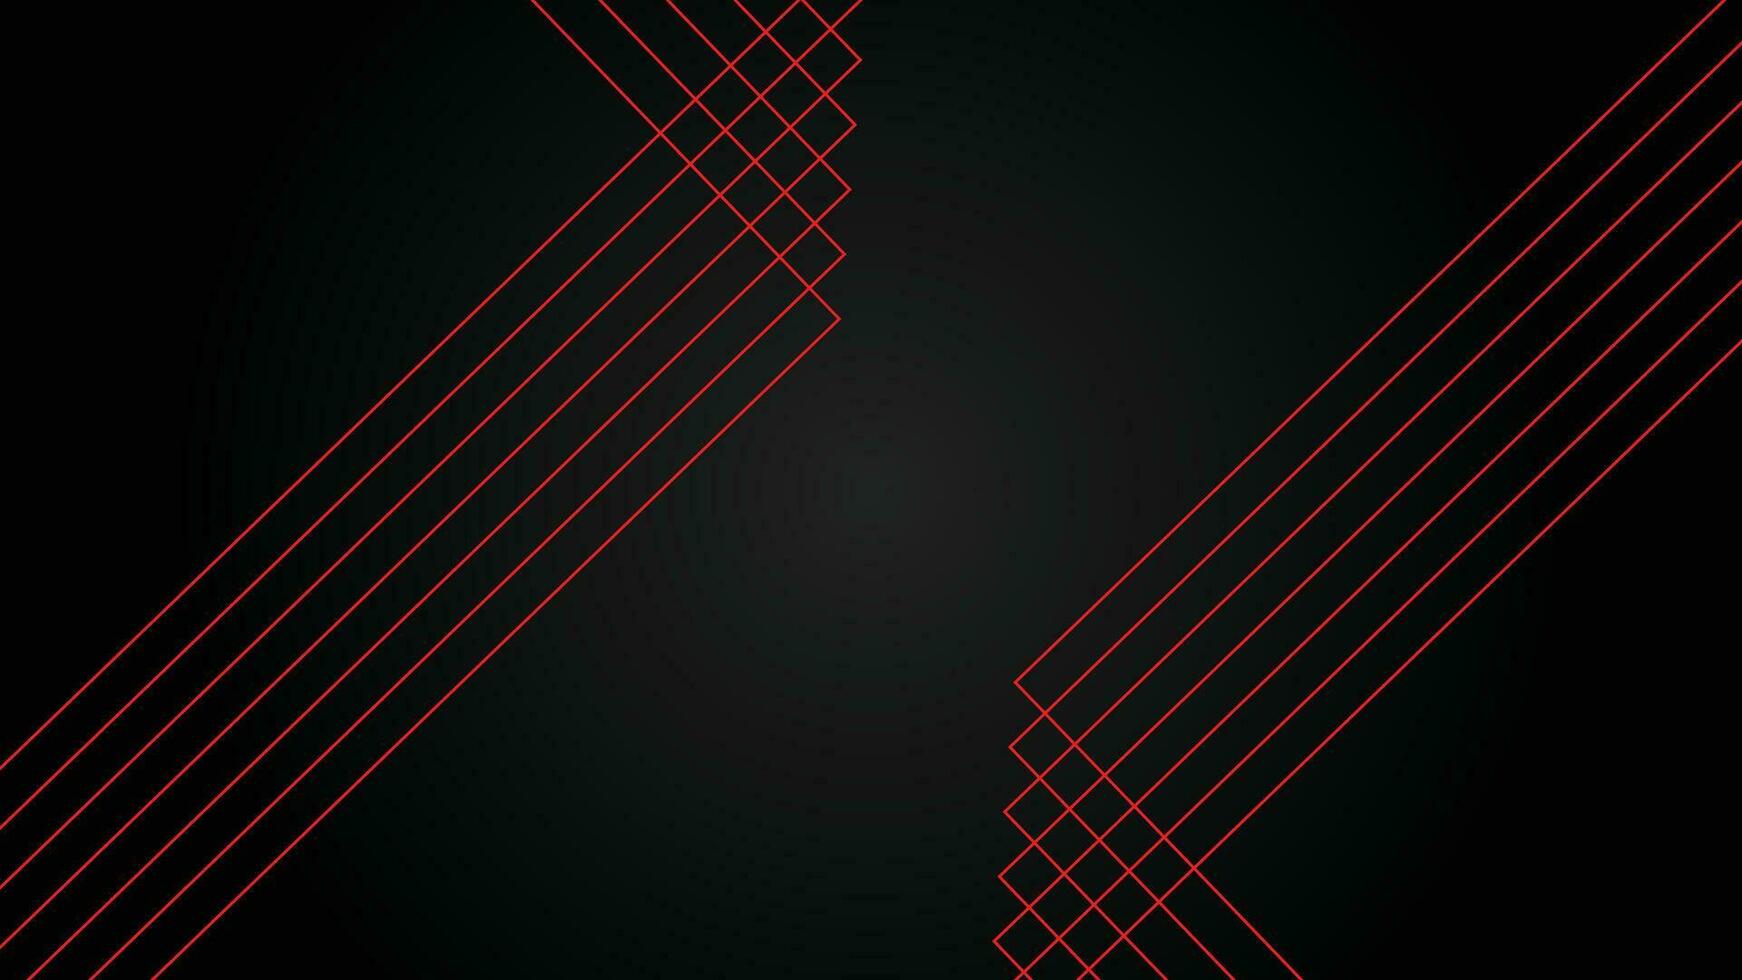 Dark futuristic wide abstract banner background with red lines pattern vector illustration